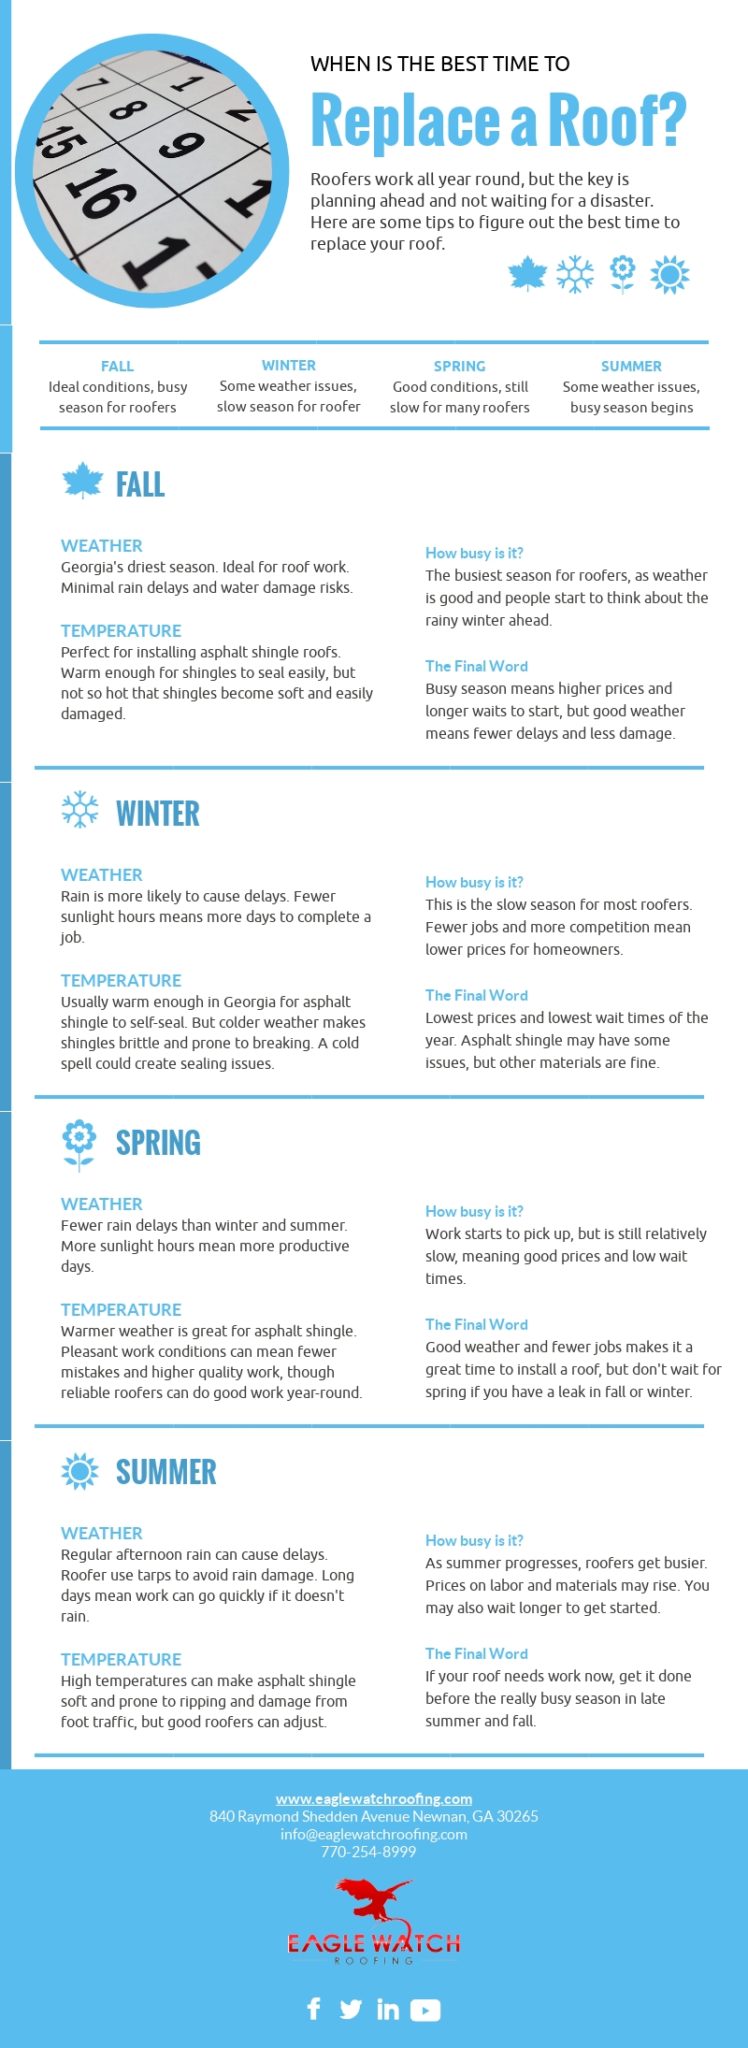 When is the Best Time to Replace a Roof [infographic]